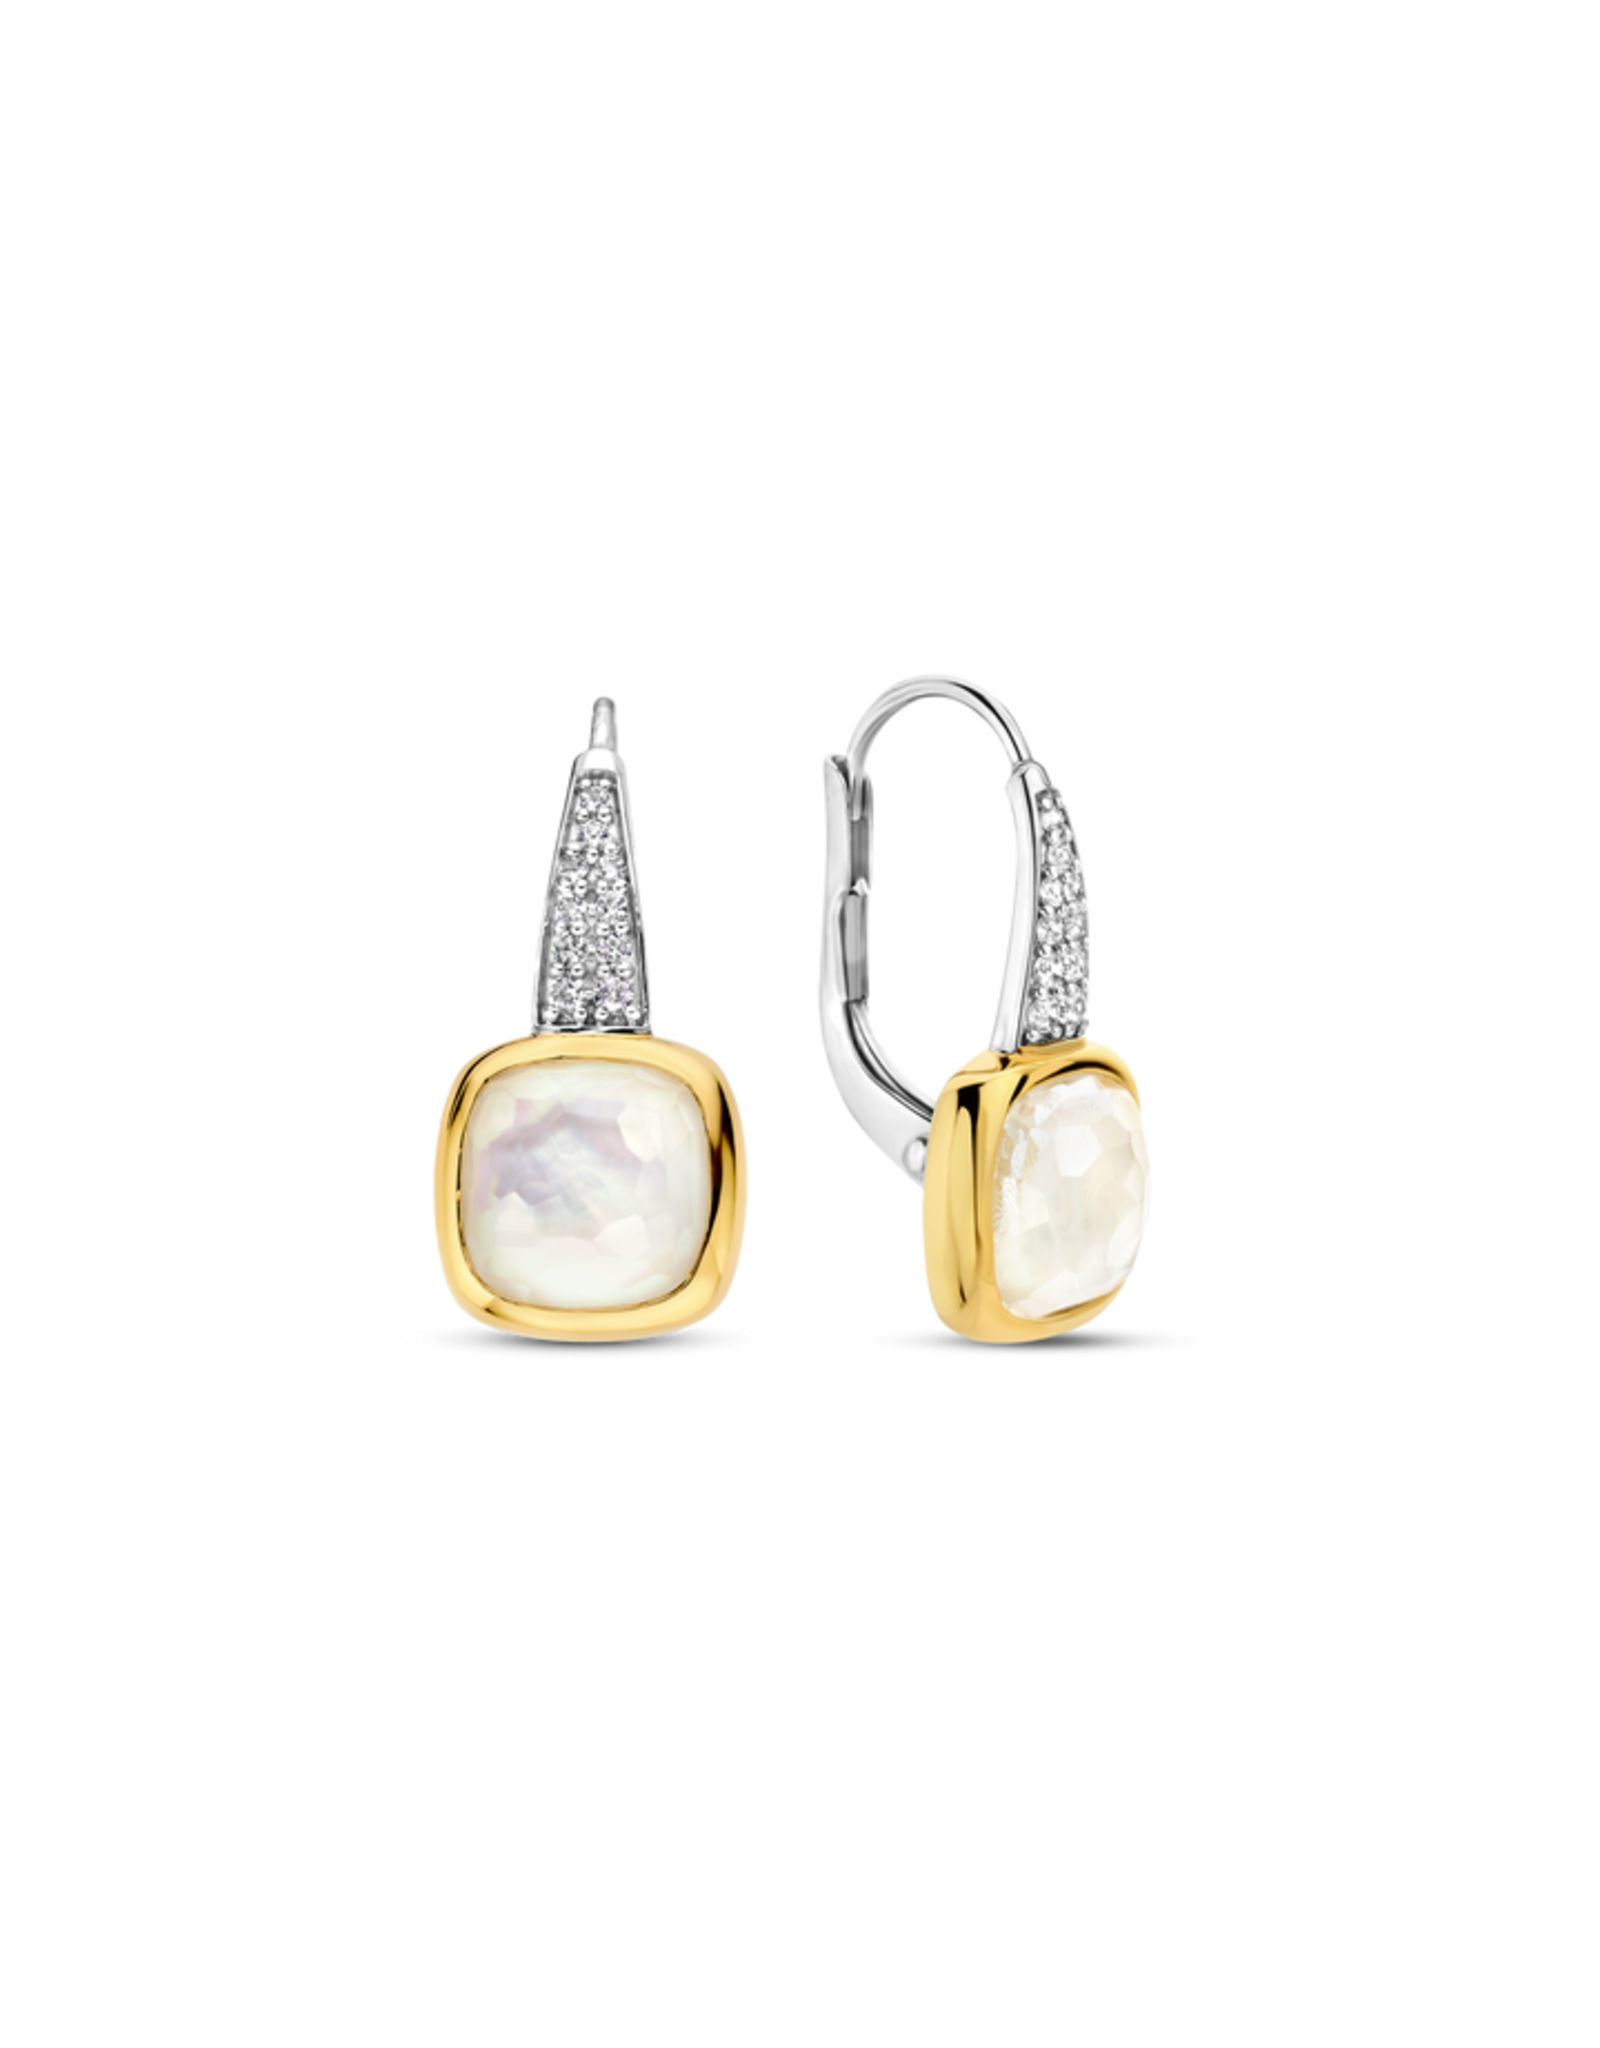 Mother of Pearl Earrings with Lever Backs